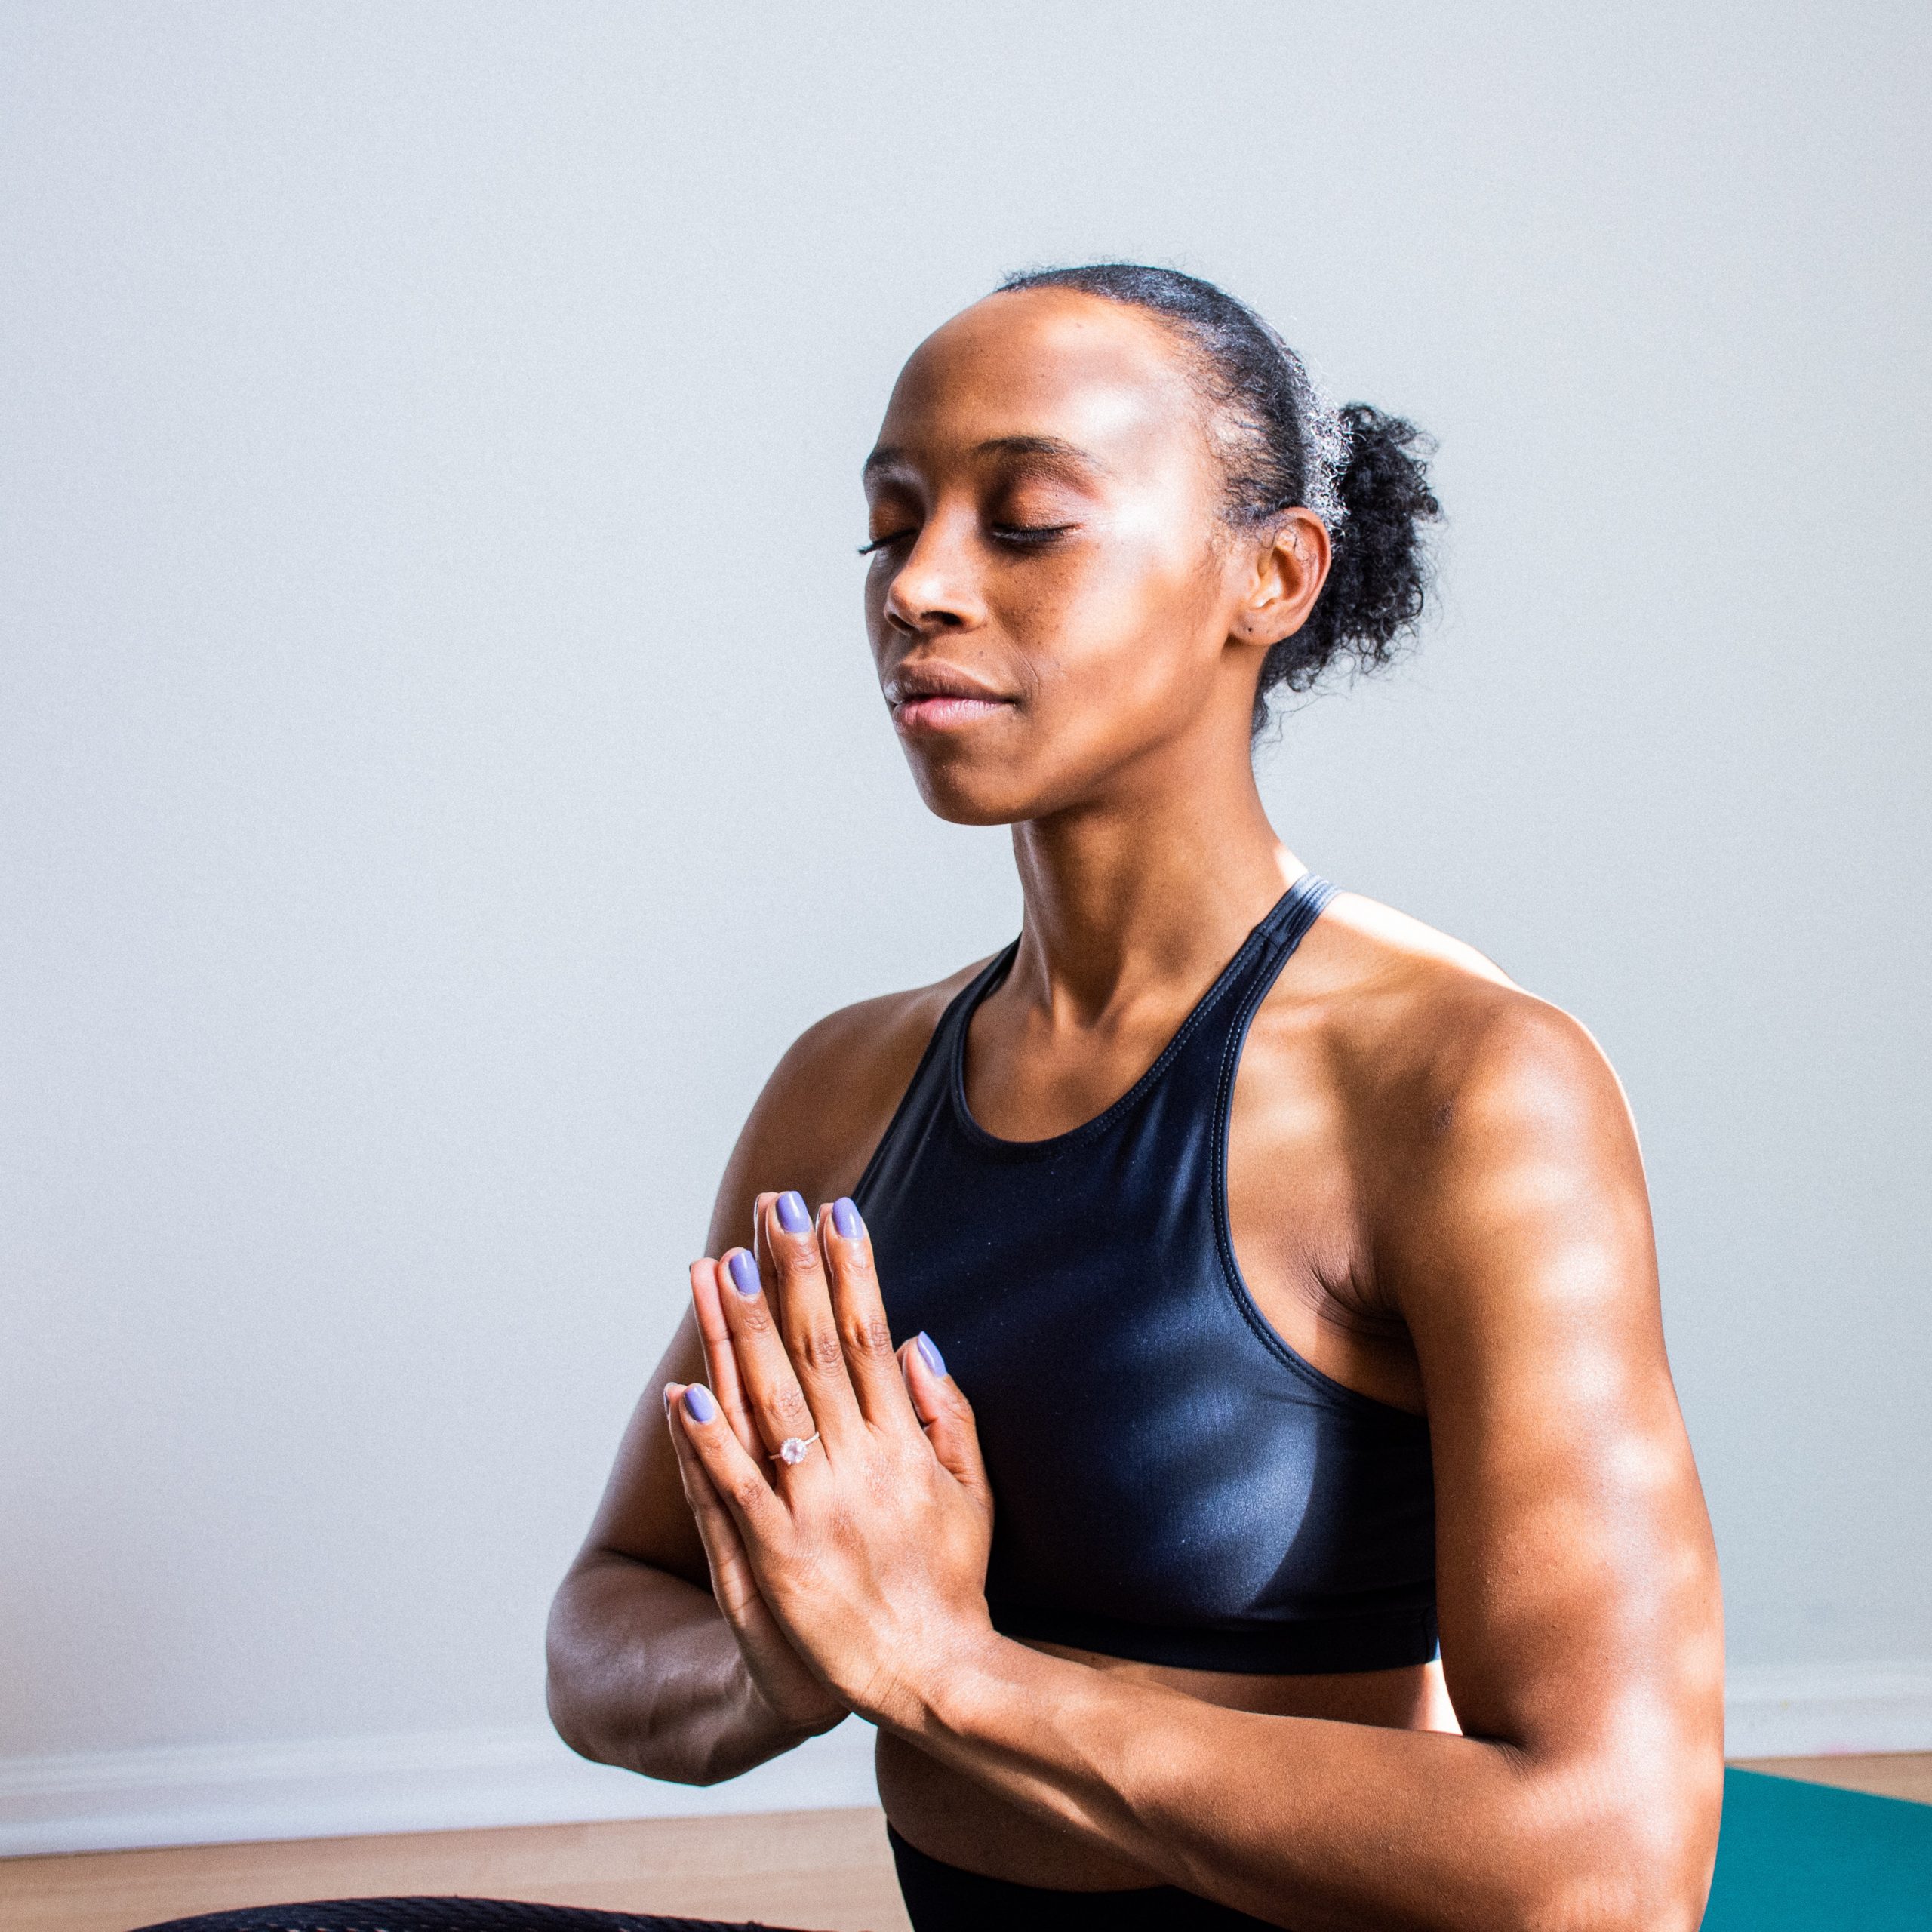 A melanated women with her hands in prayer and her eyes are closed in a yoga/meditation setting